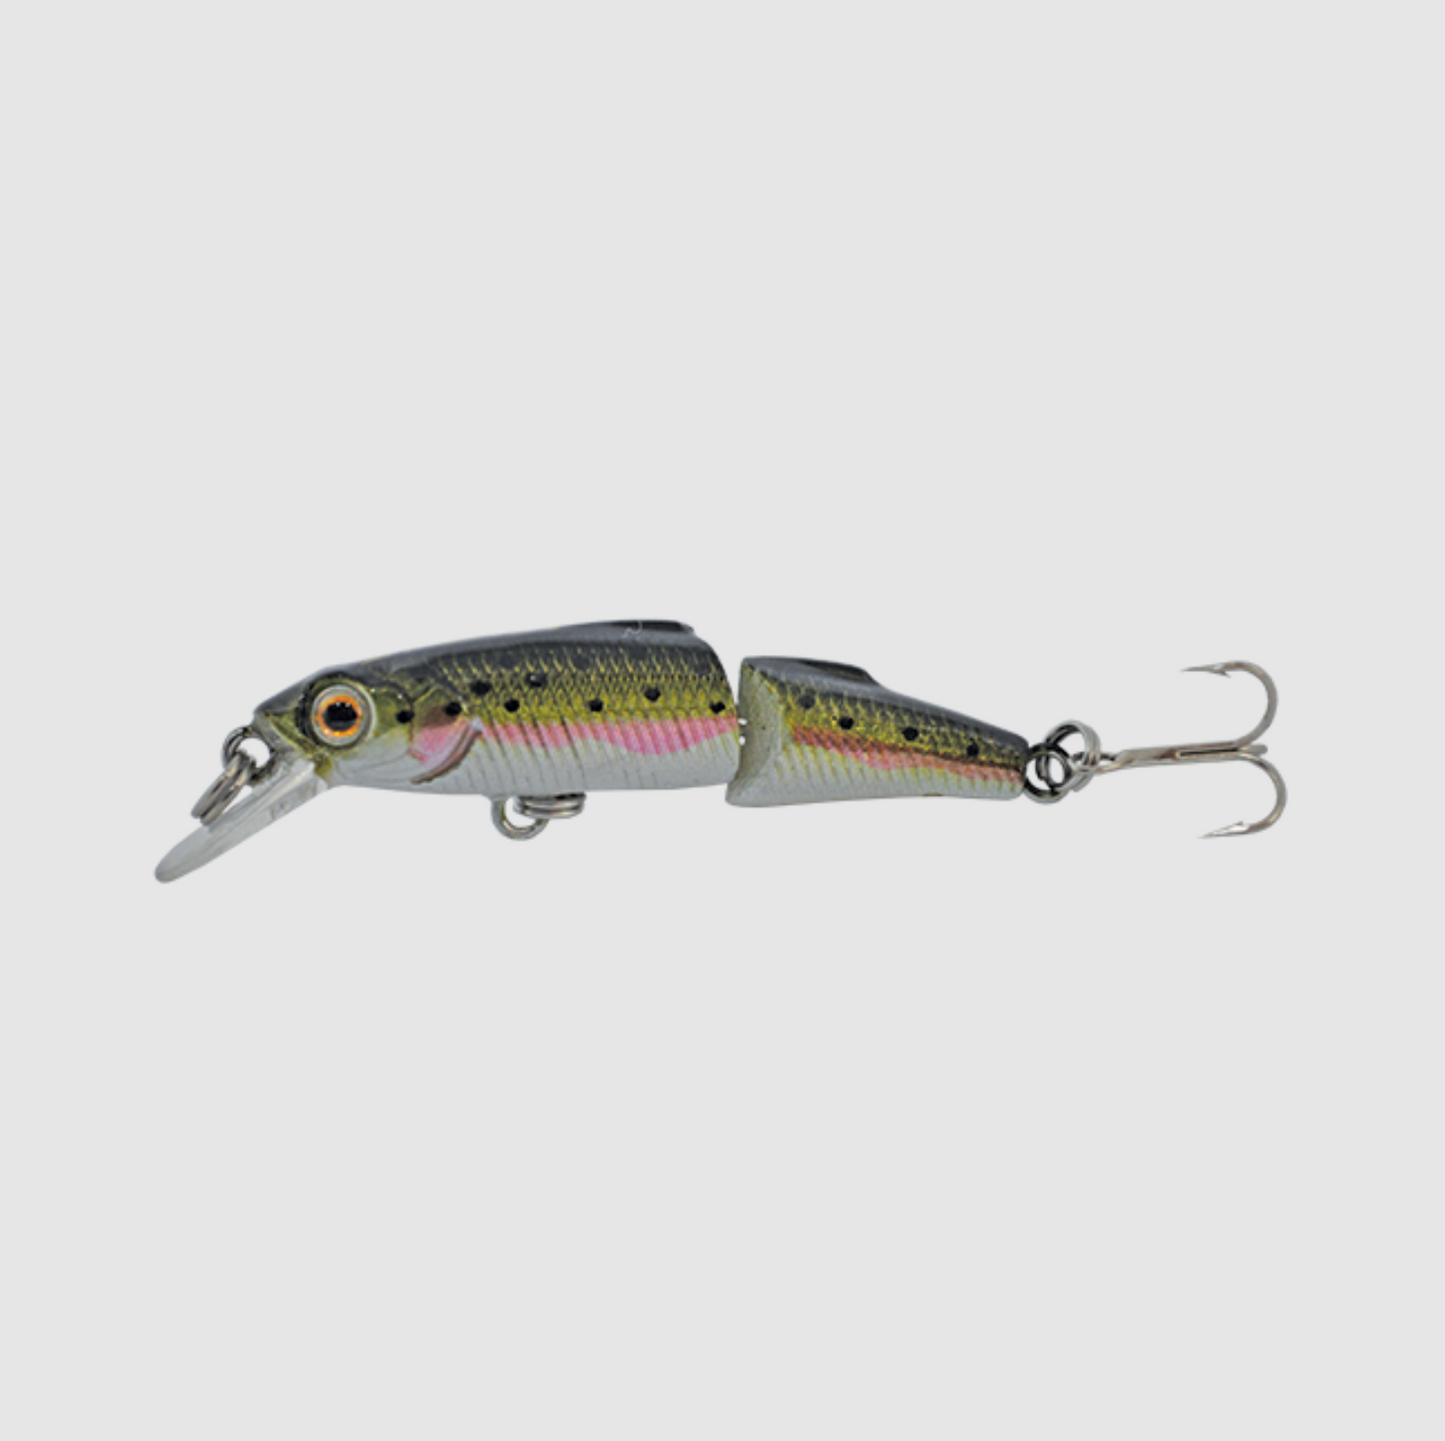 Strike Pro Jointed Sprat - #553 – Trophy Trout Lures and Fly Fishing